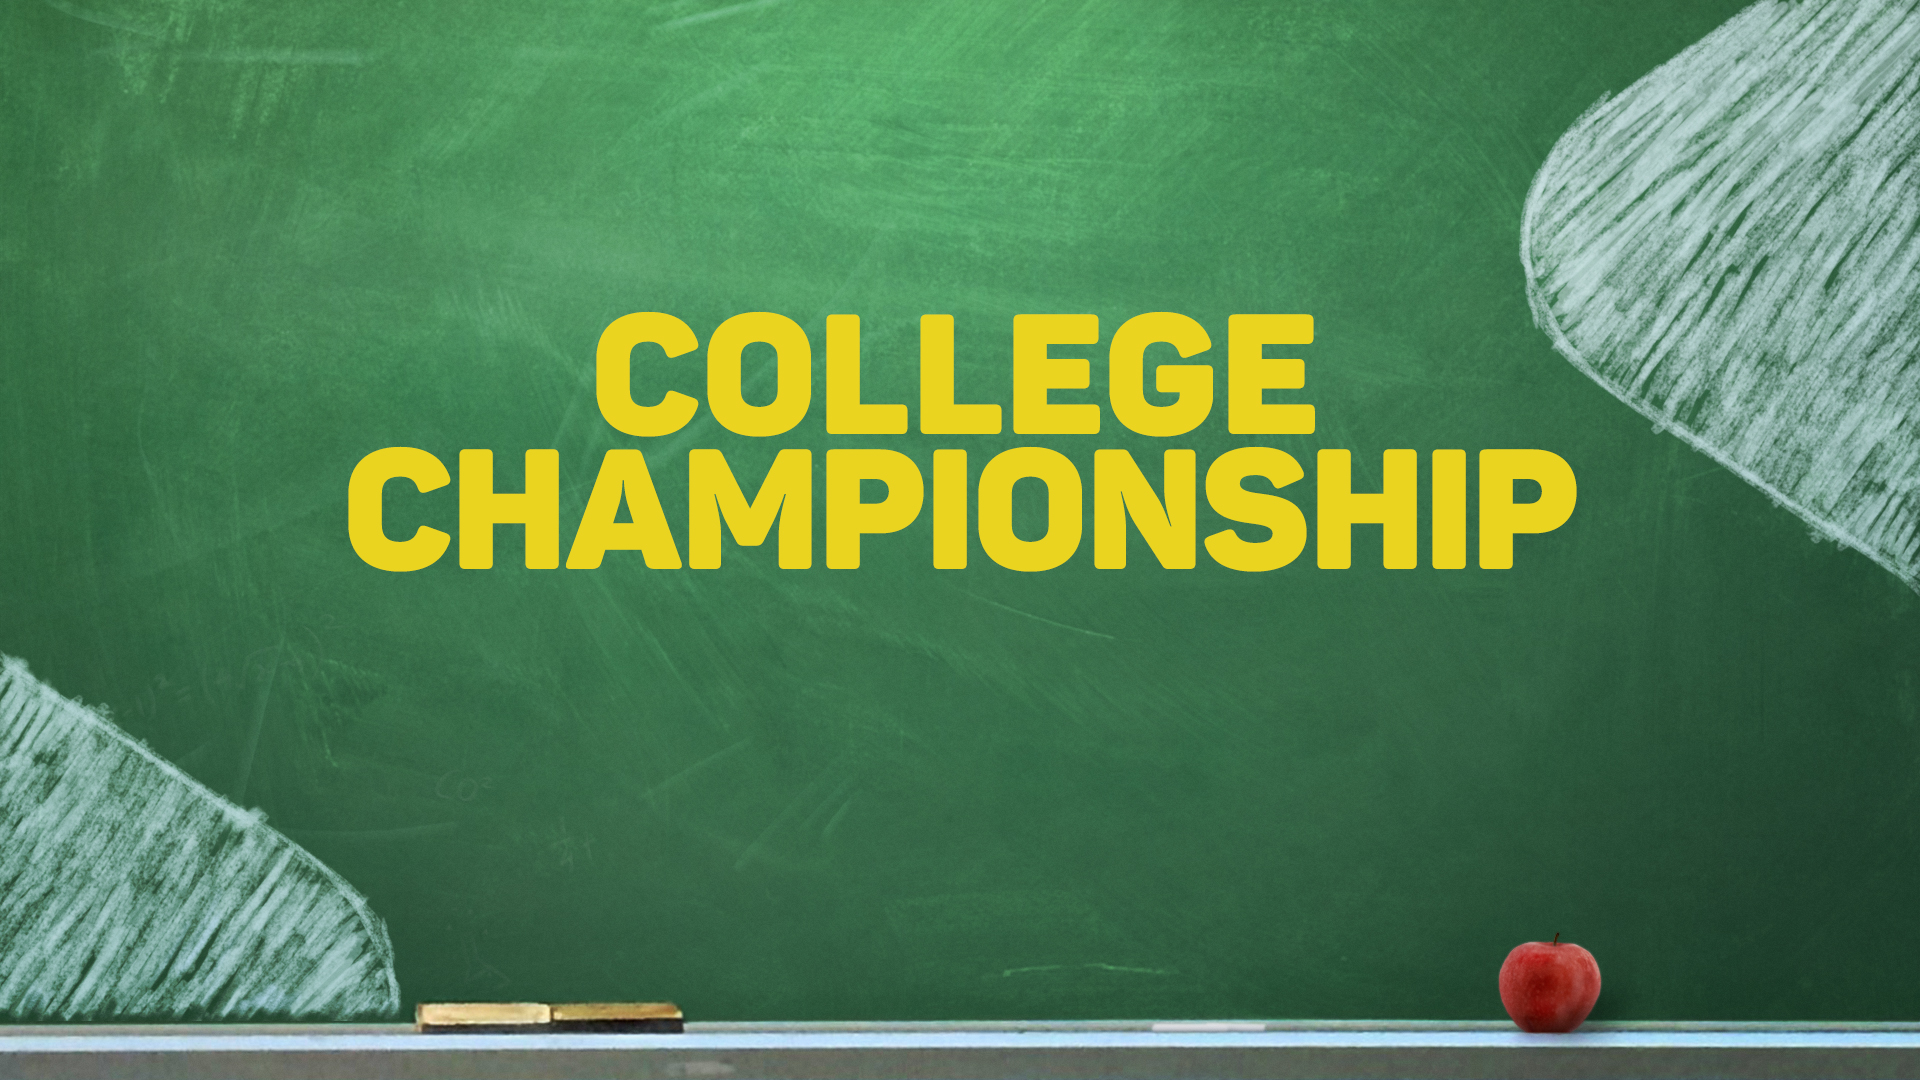 Jeopardy! PlayShow: College Championship